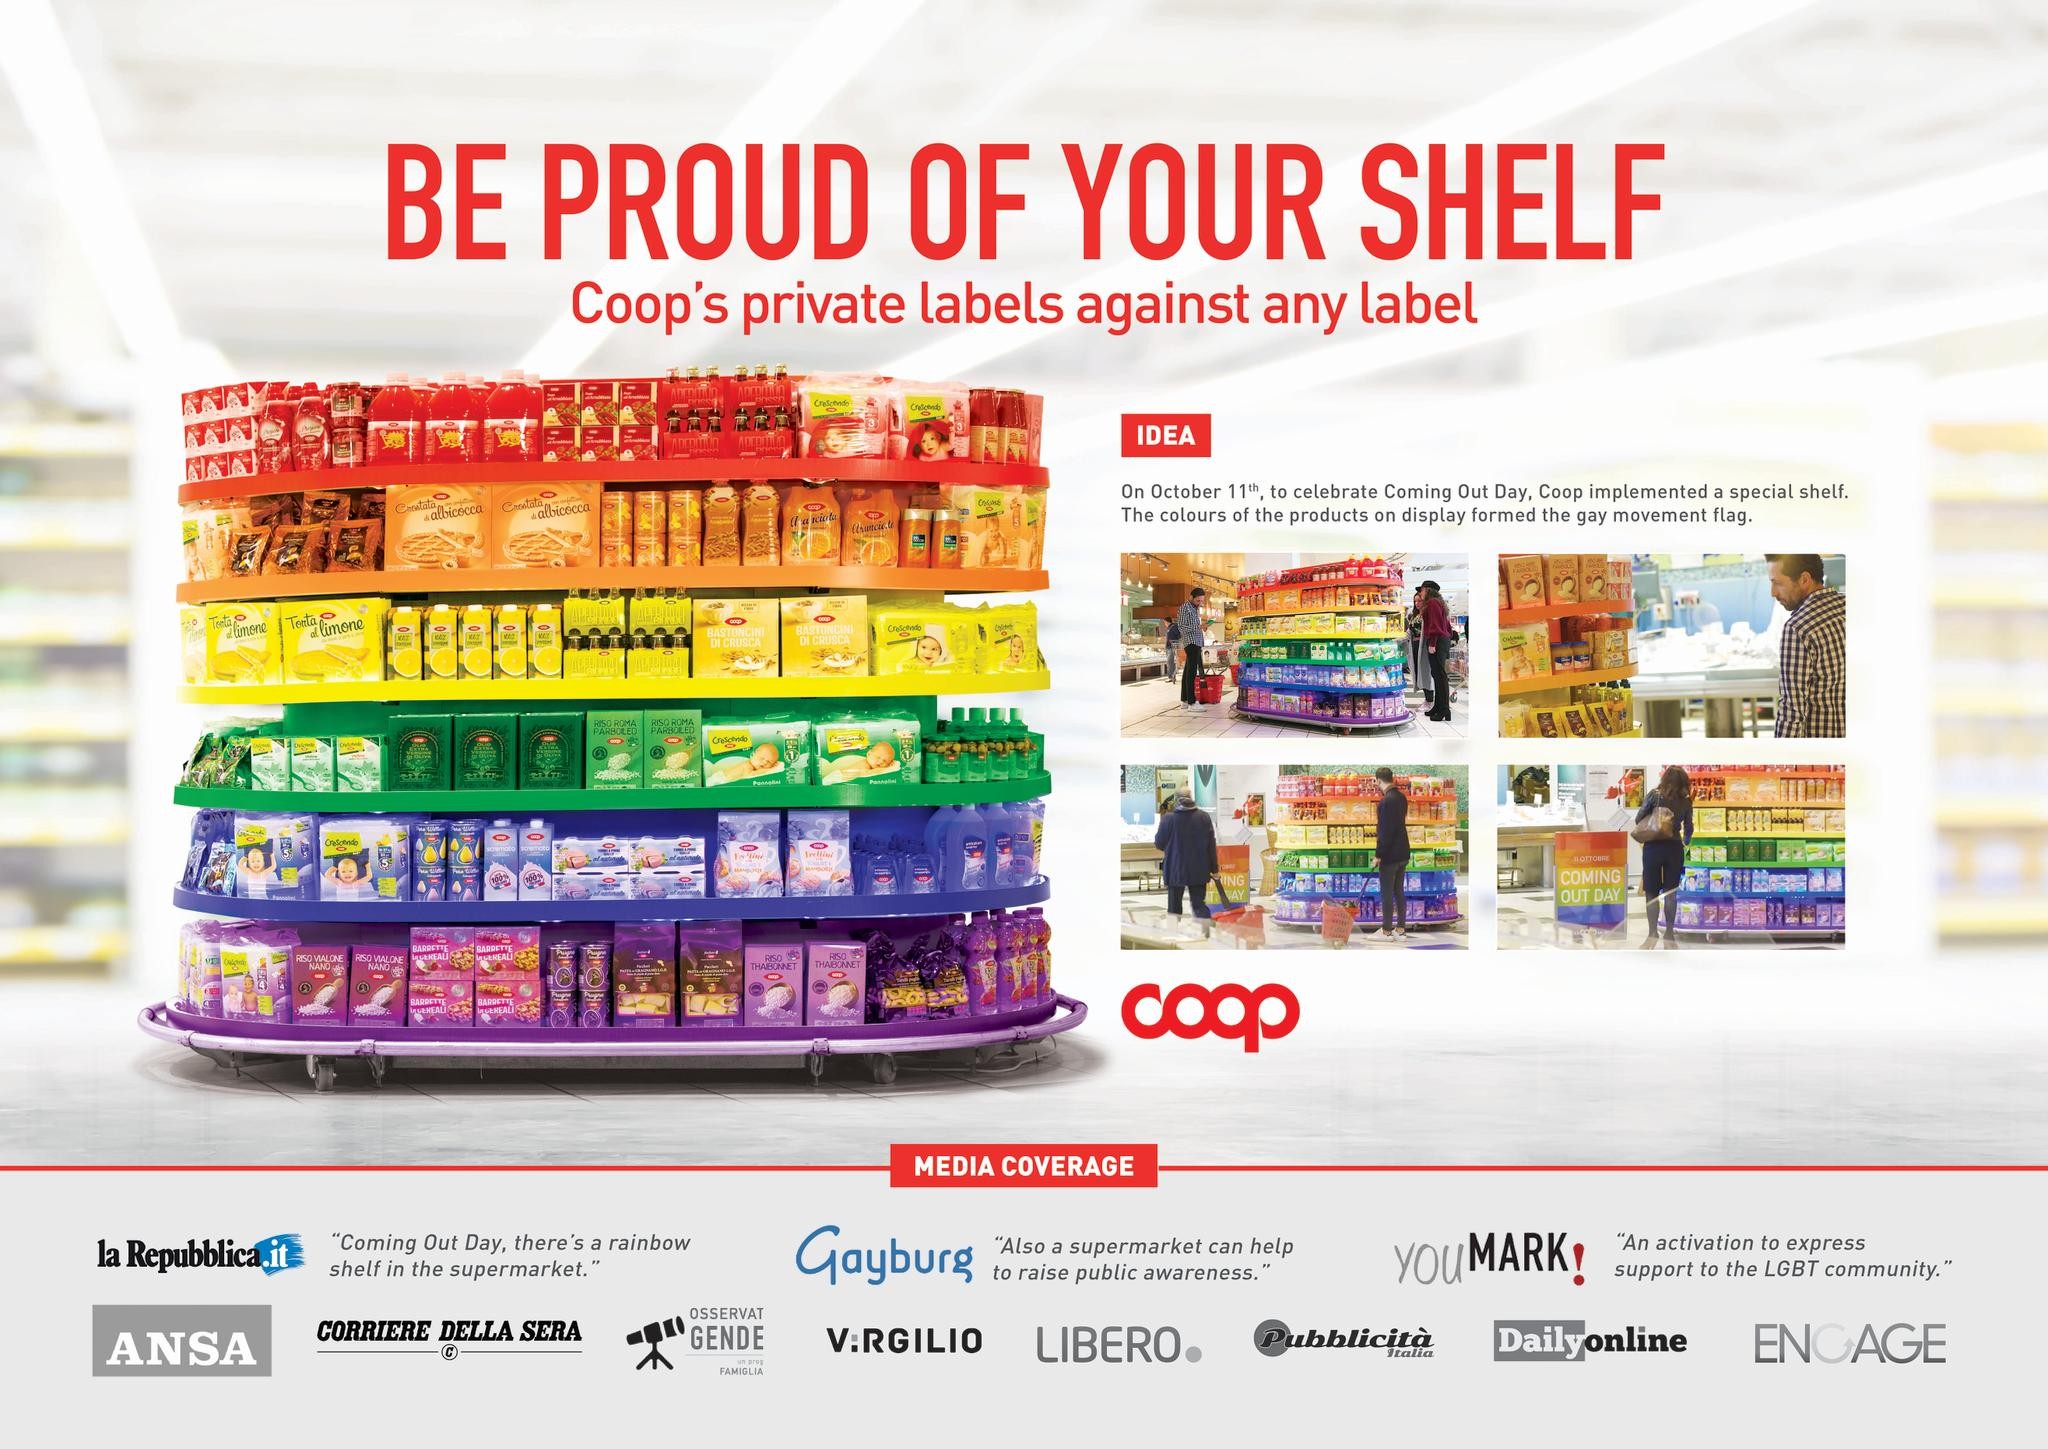 Be proud of your shelf